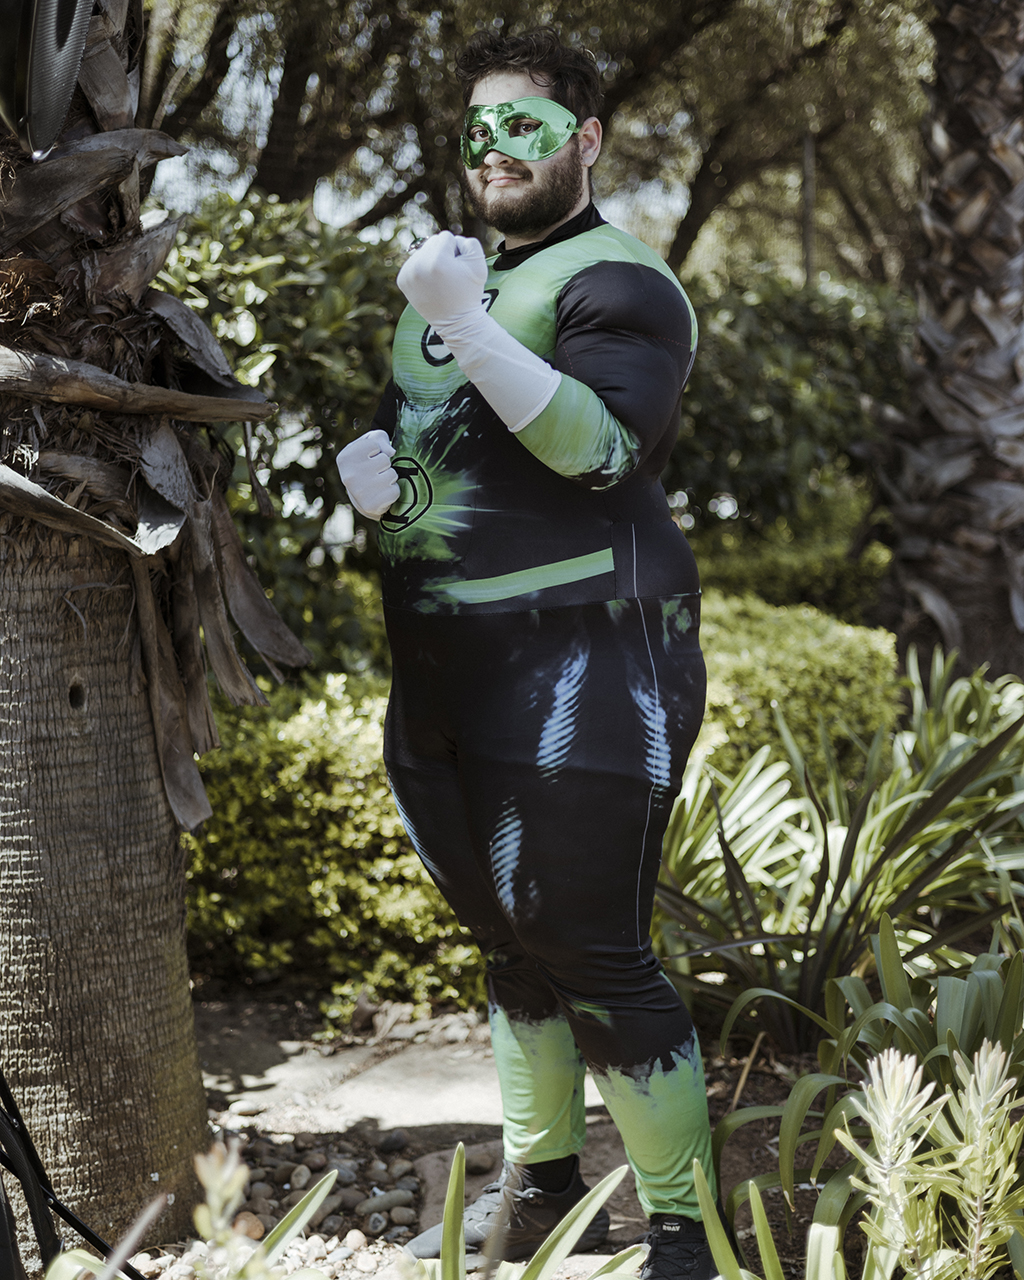 South African cosplayer Alec Papavarnavas, 23, poses for a portrait while dressed as the Green Lantern character at the 2022 Comic Con Africa.